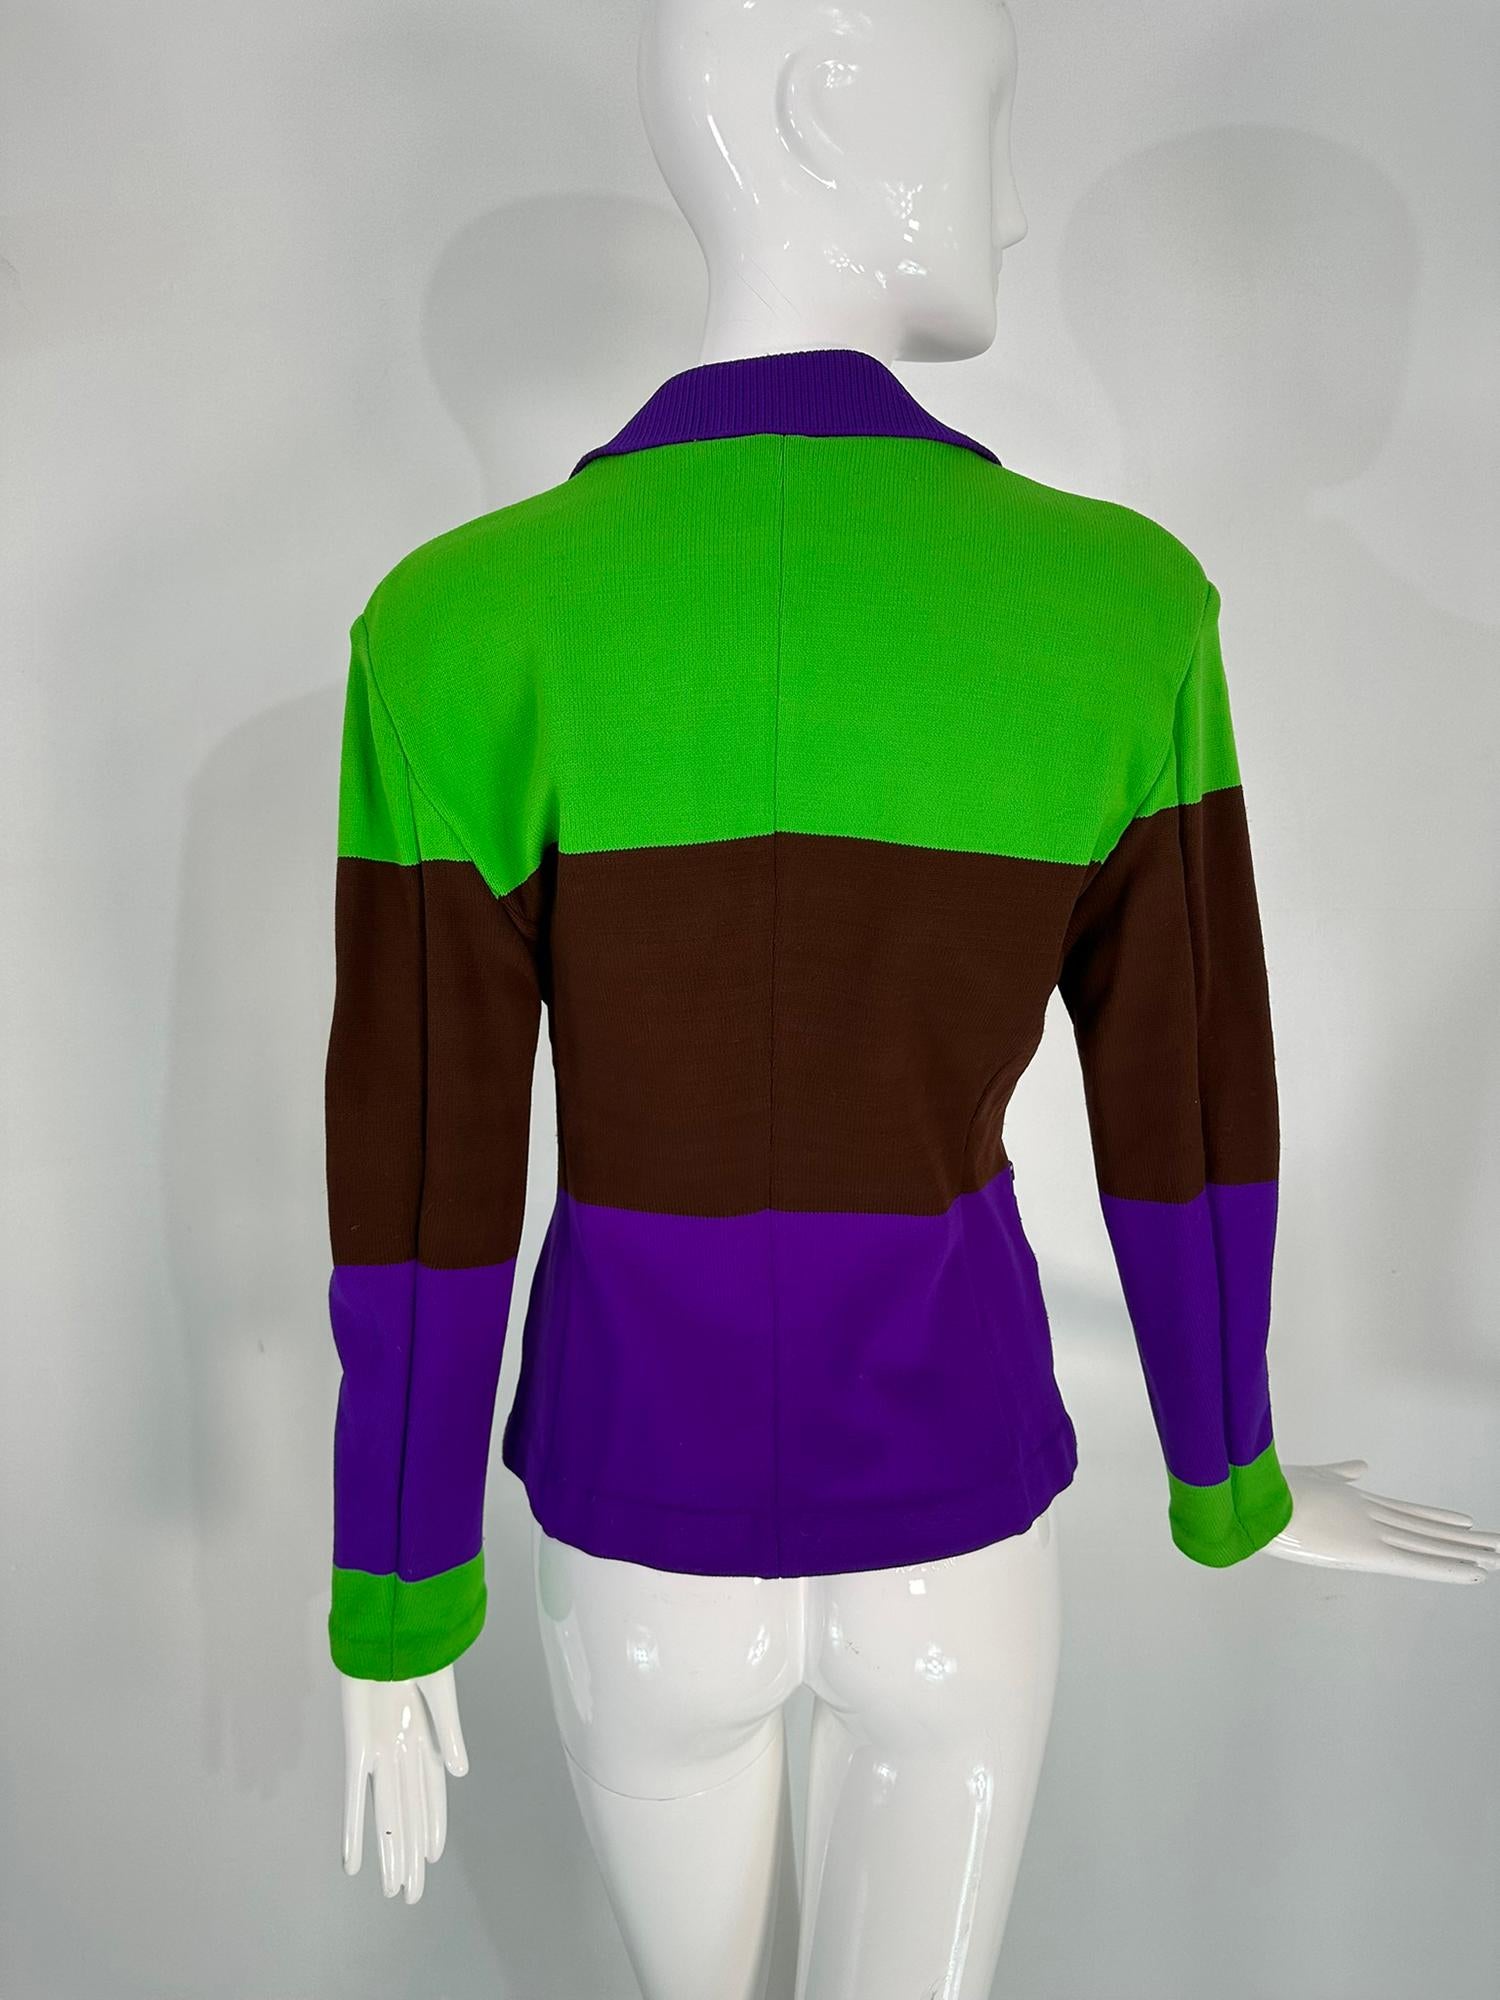 Issey Miyake Colour Block Nylon Knit Jacket in Acid Green Brown & Purple Small For Sale 2